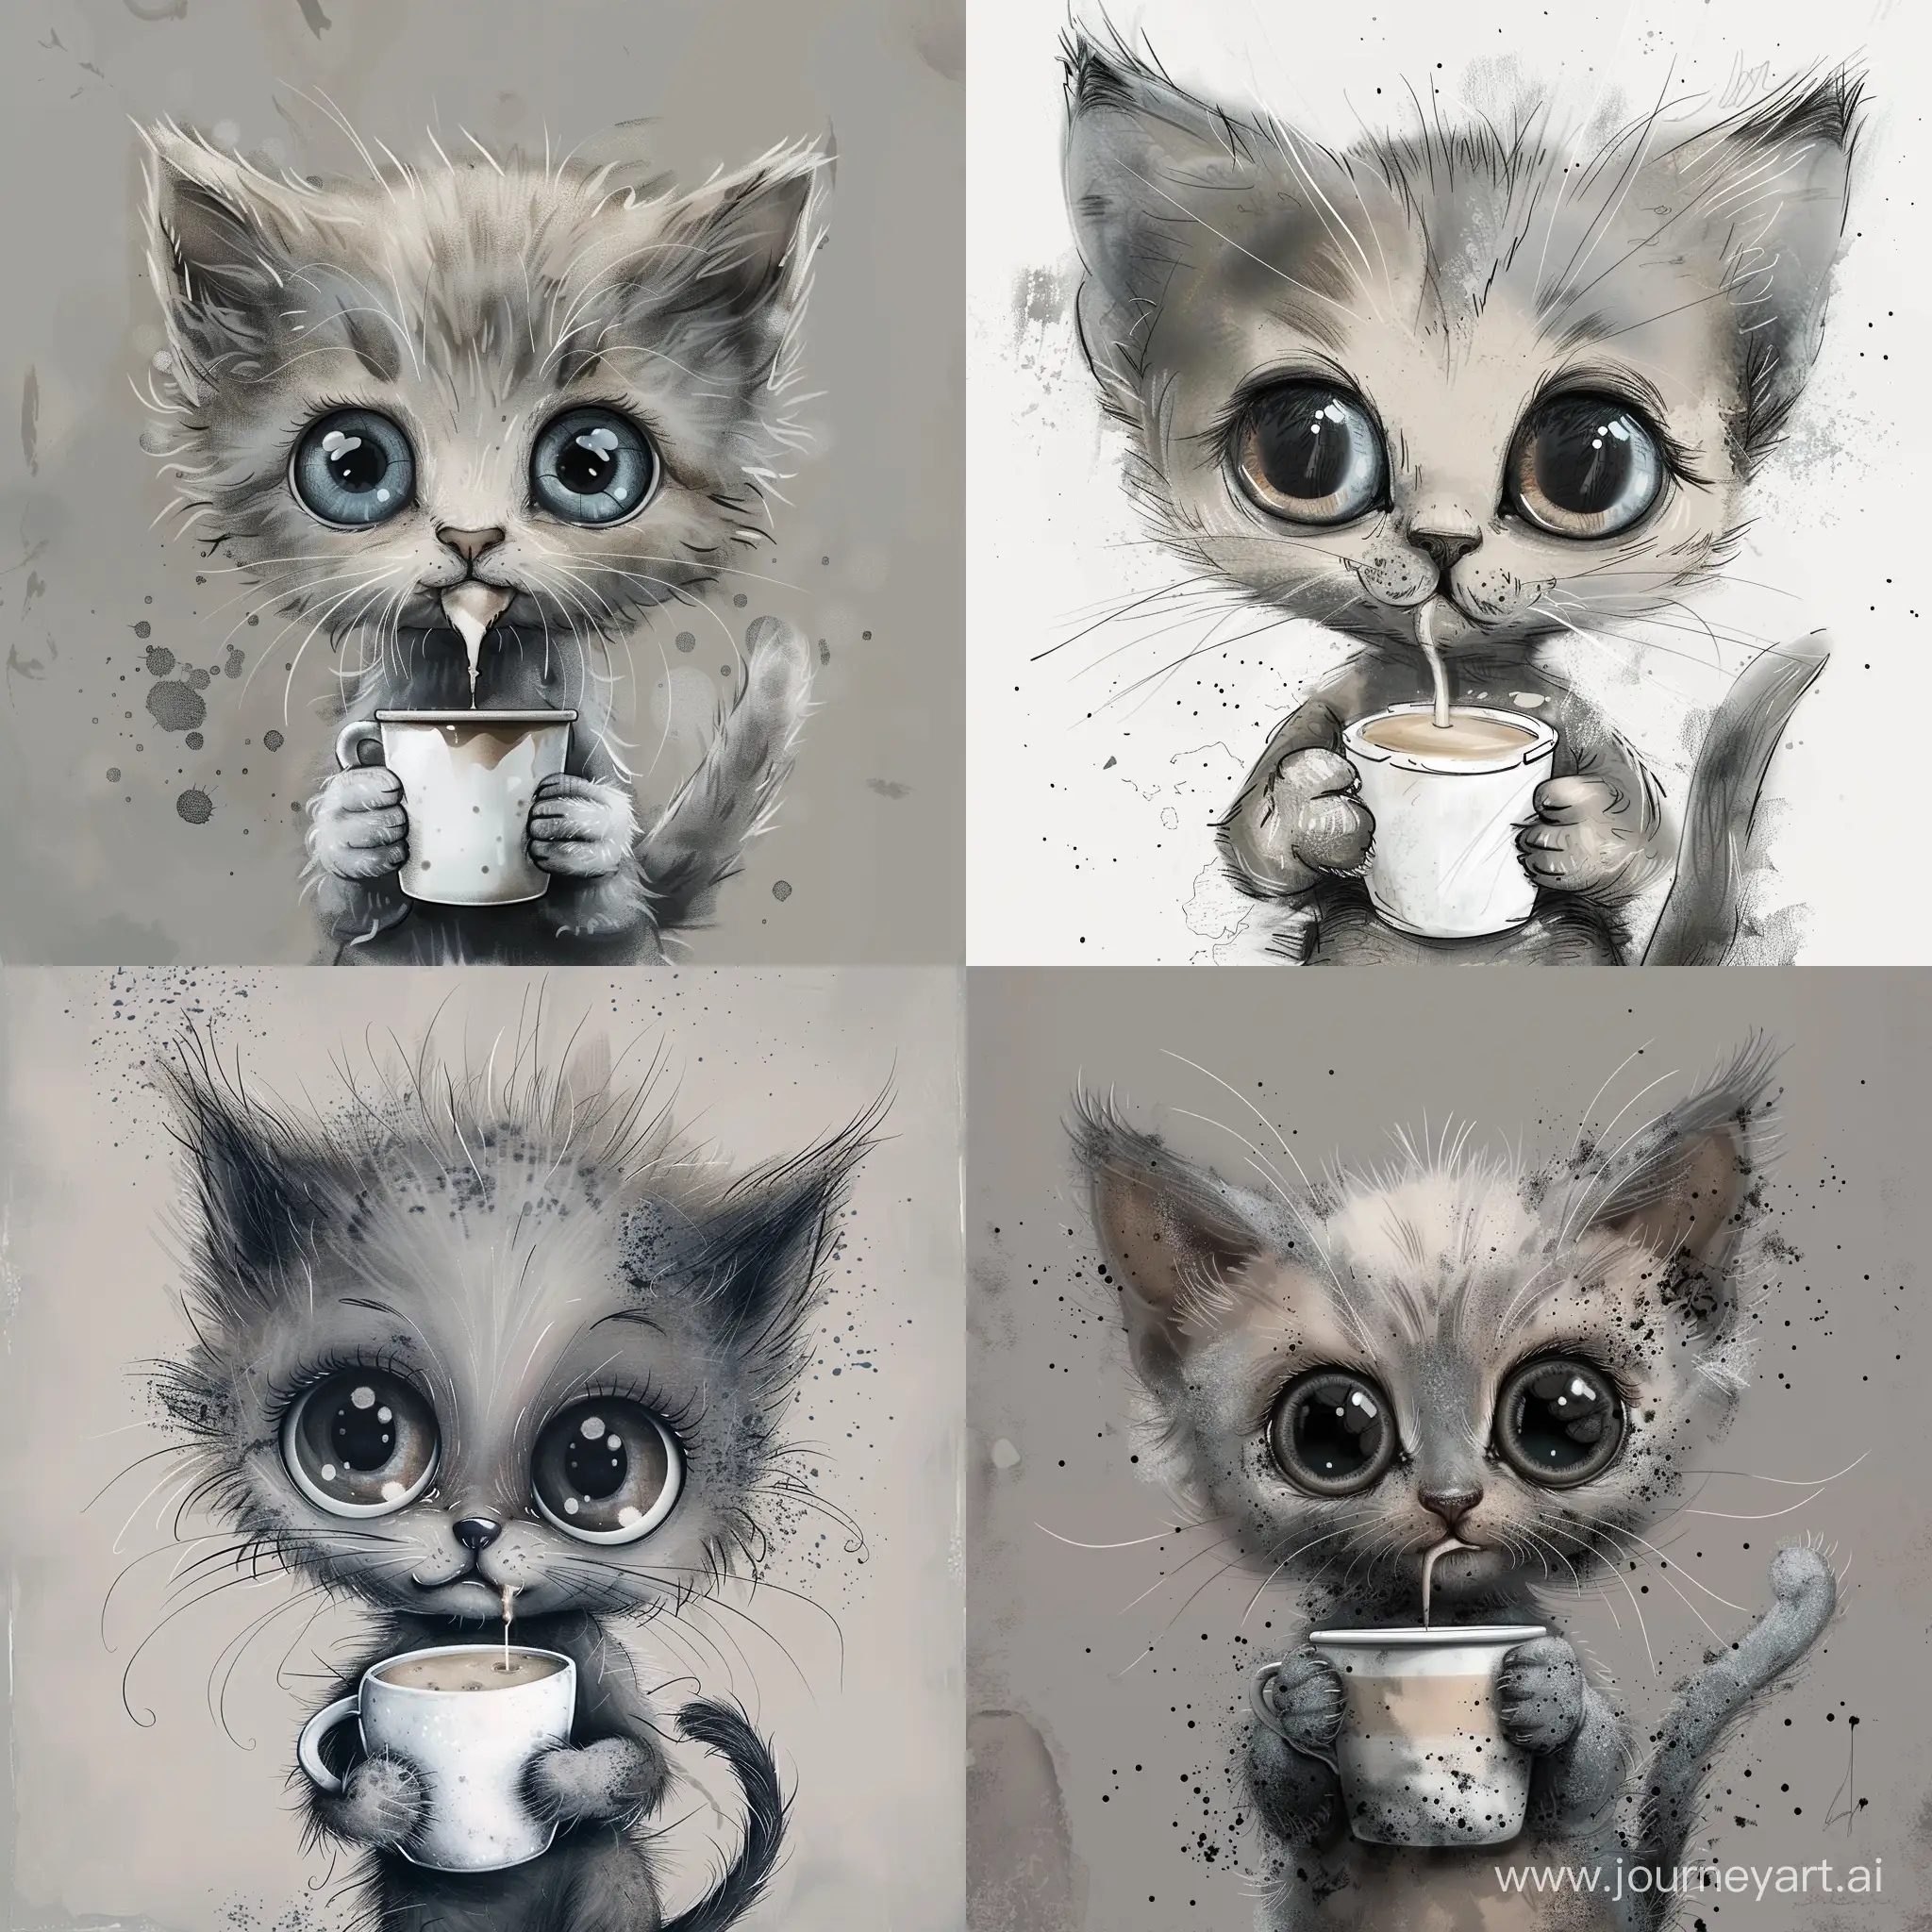 Adorable-Kitten-Holding-a-Latte-Cup-and-Childs-Drawing